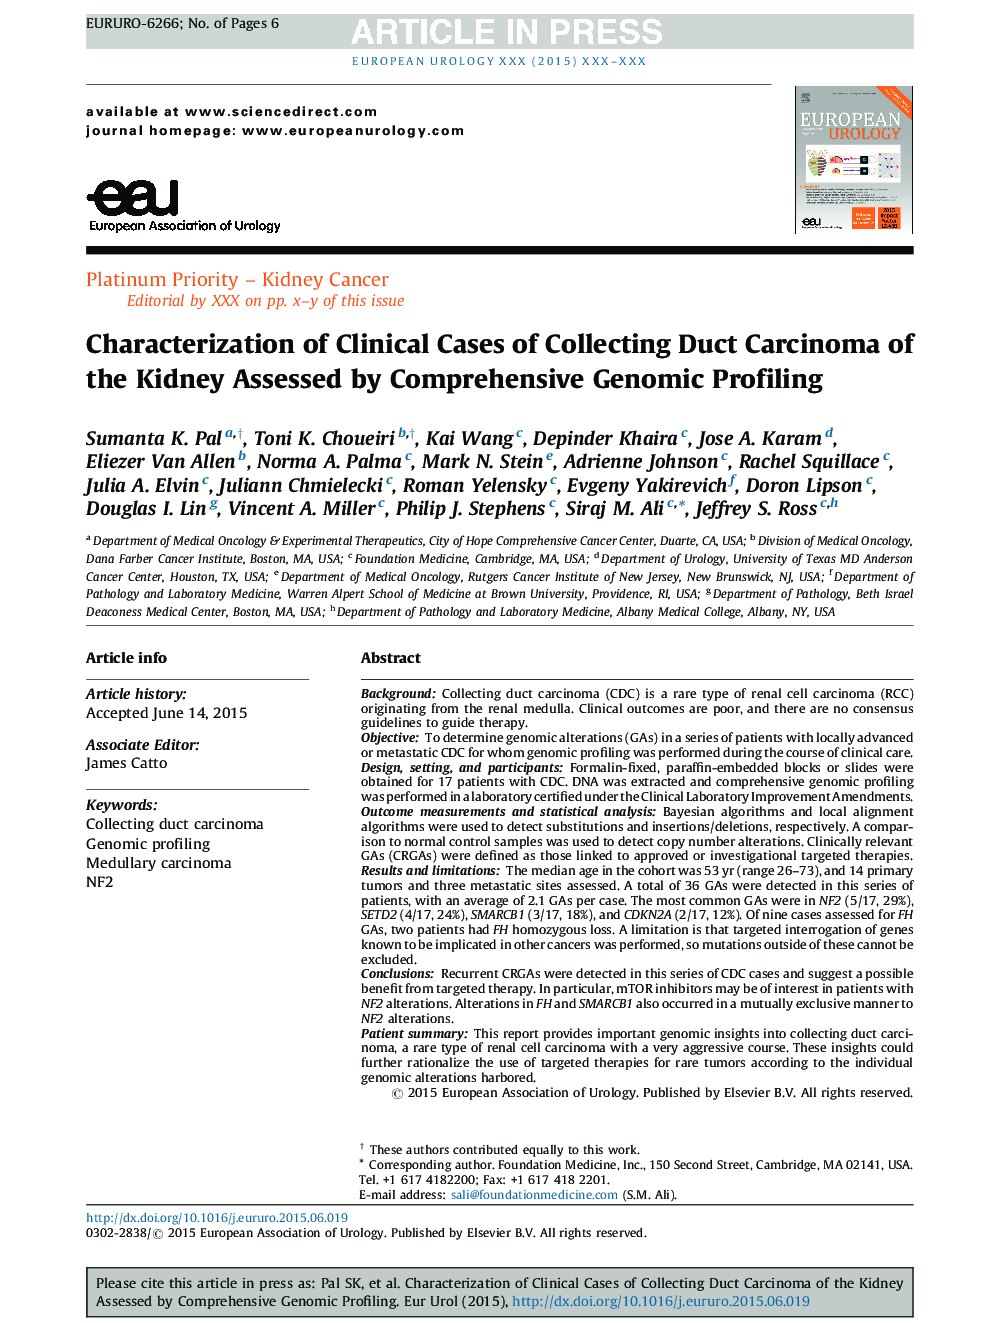 Characterization of Clinical Cases of Collecting Duct Carcinoma of the Kidney Assessed by Comprehensive Genomic Profiling